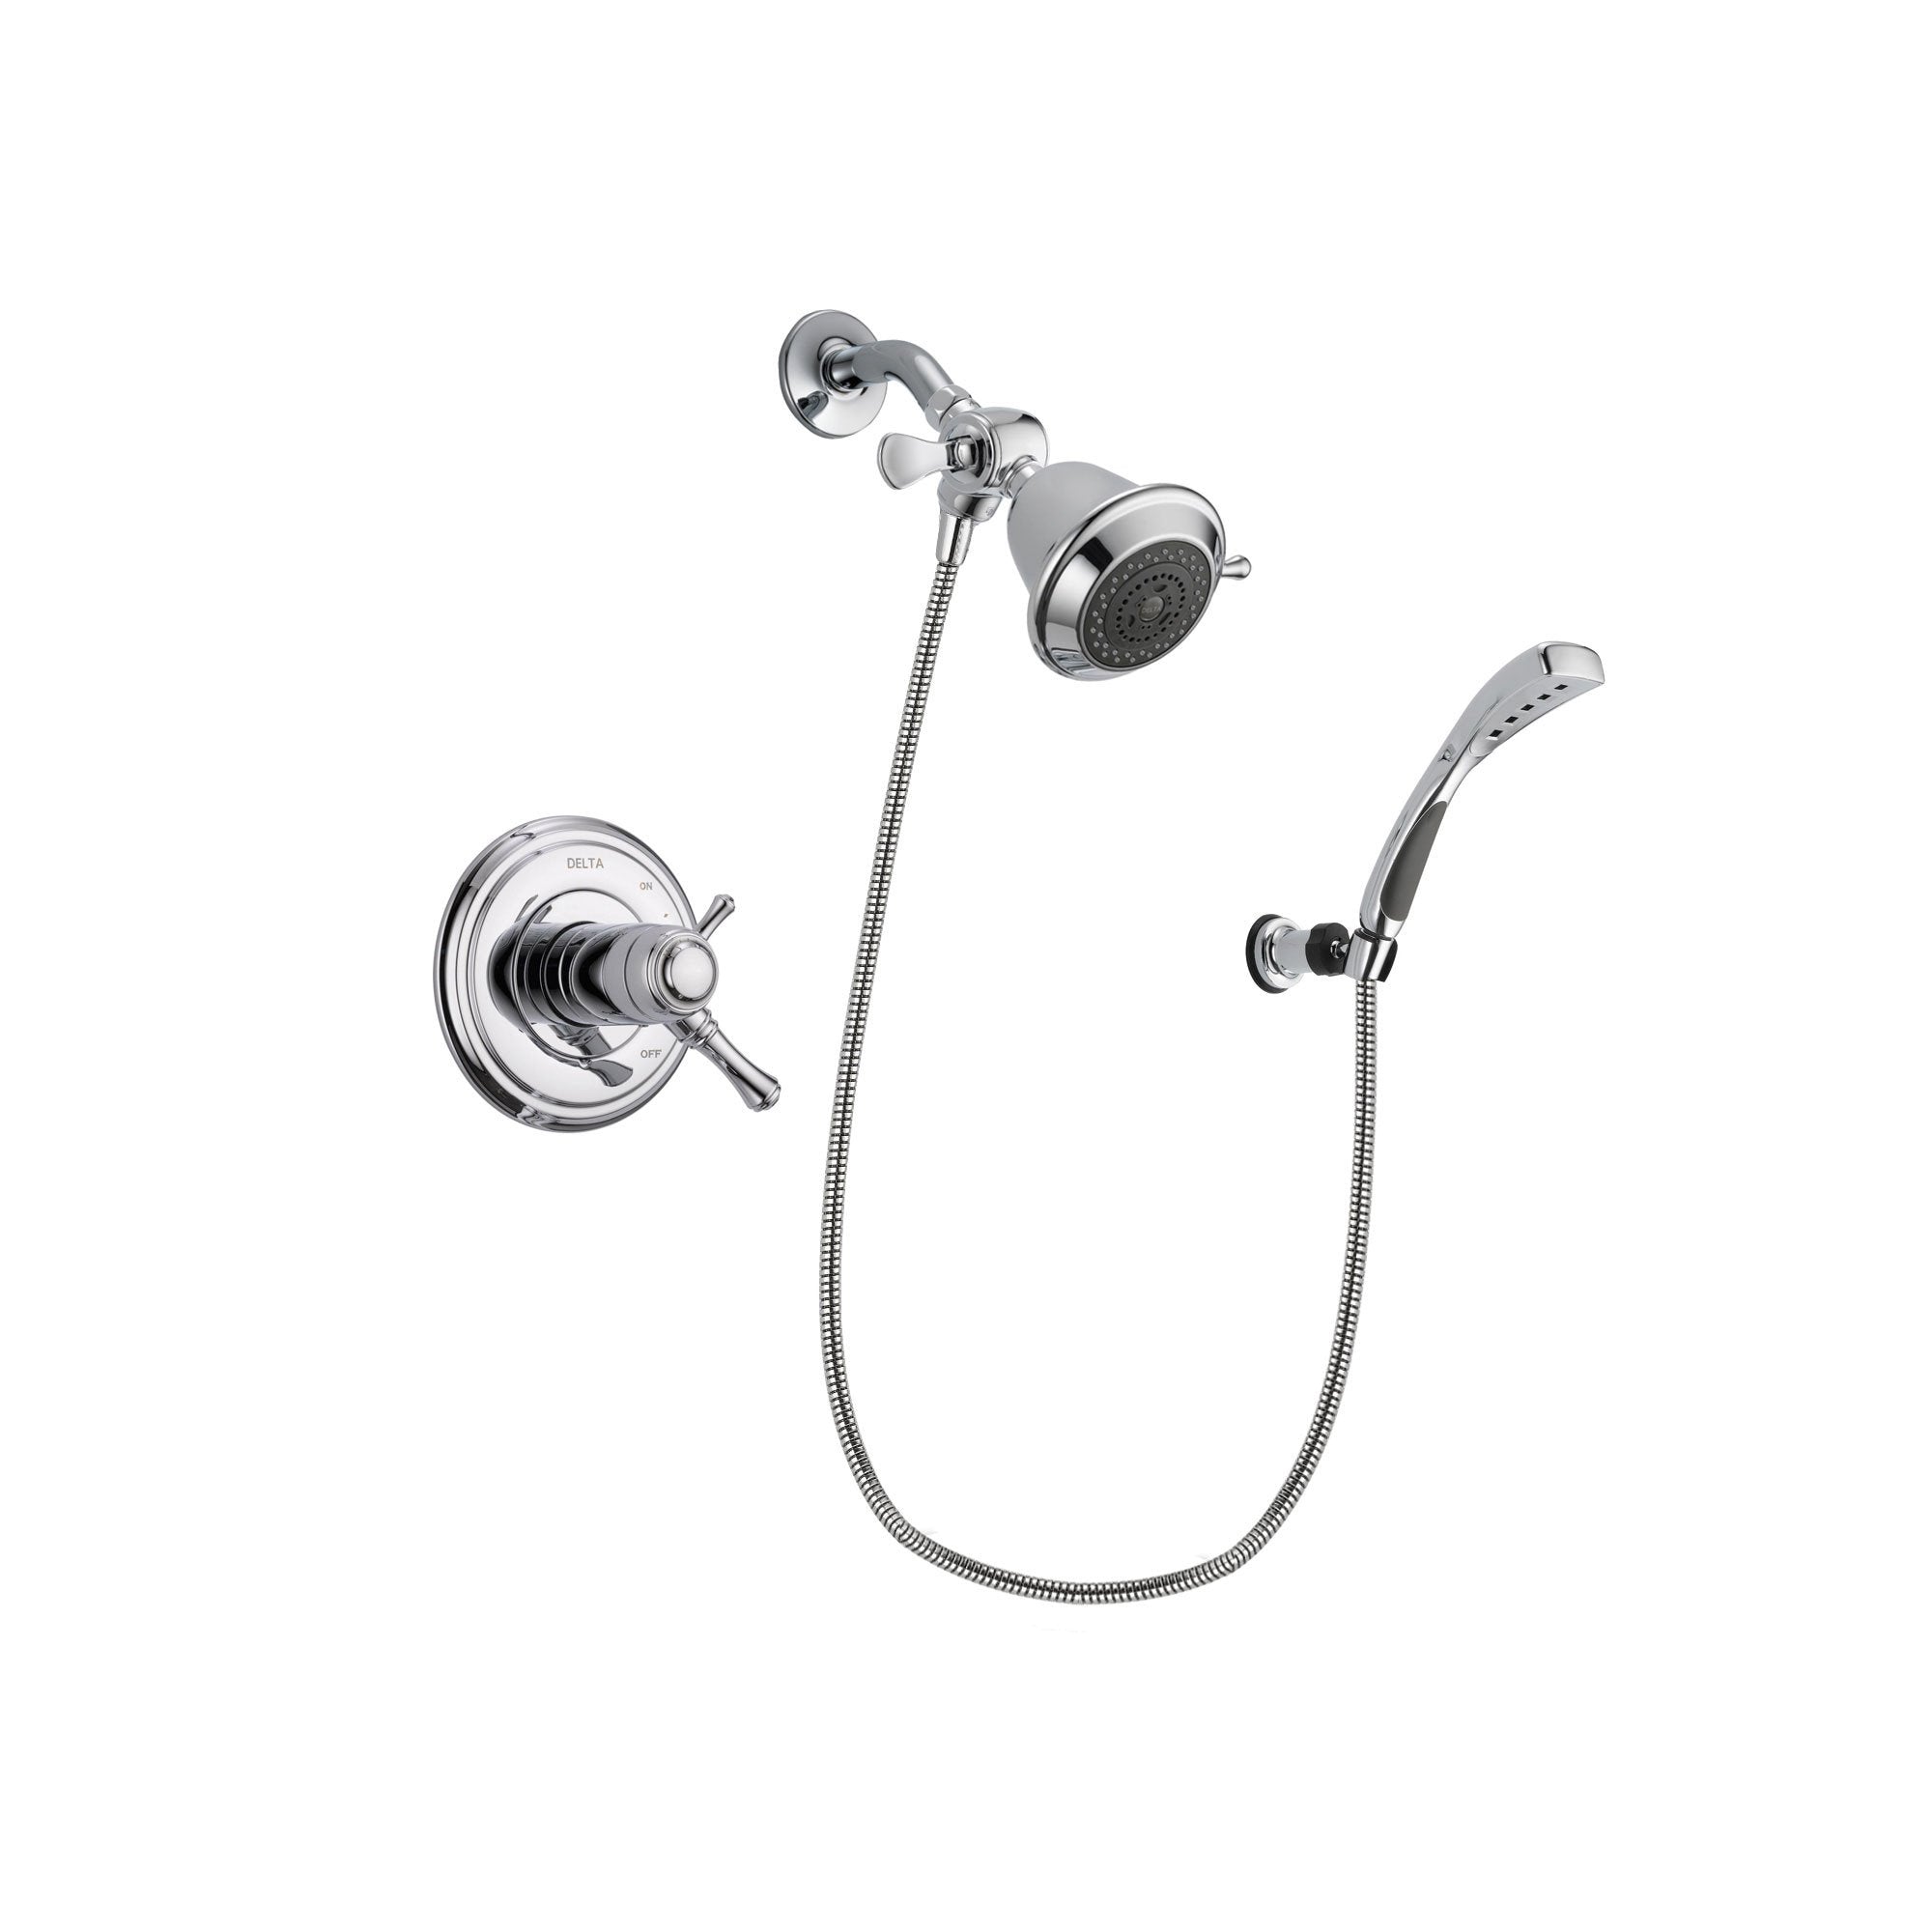 Delta Cassidy Chrome Finish Thermostatic Shower Faucet System Package with Shower Head and Wall-Mount Bracket with Handheld Shower Spray Includes Rough-in Valve DSP0978V